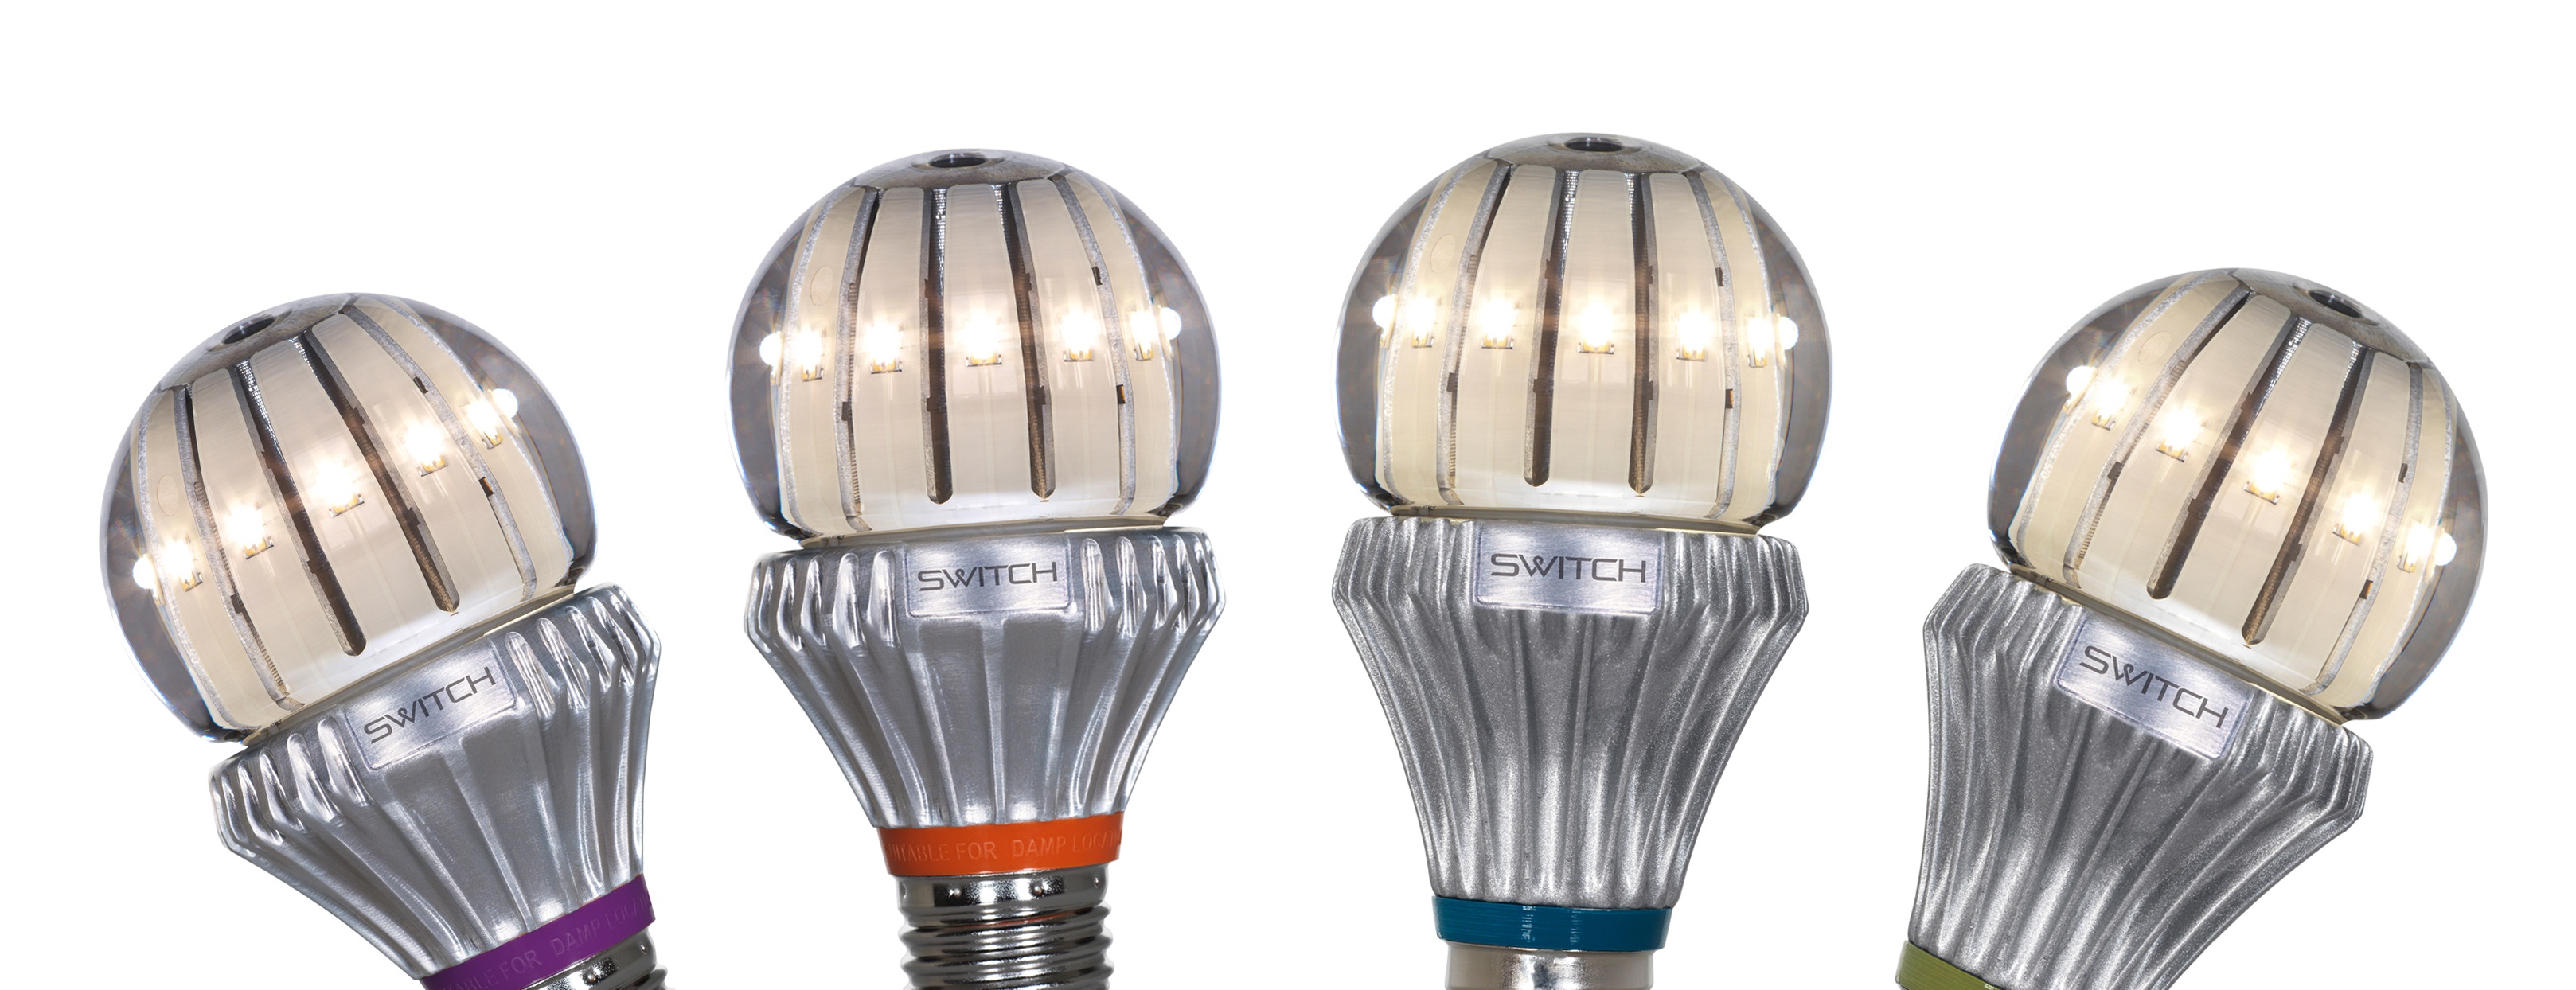 Switch Lighting Announces Production of Full Line of LED A-Lamps